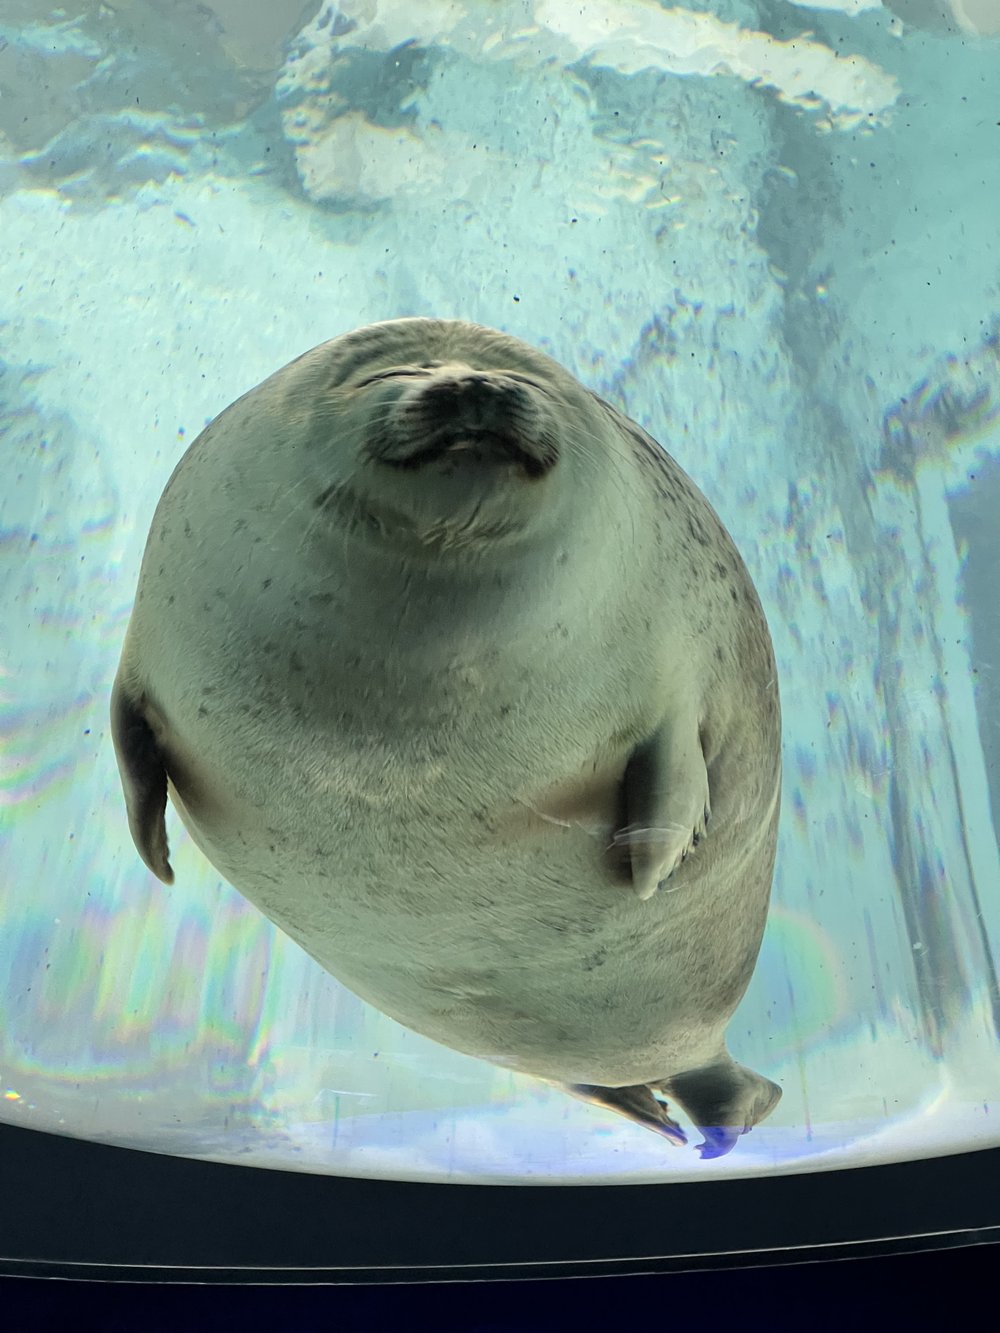  Close up view of smiling ringed seal from below 